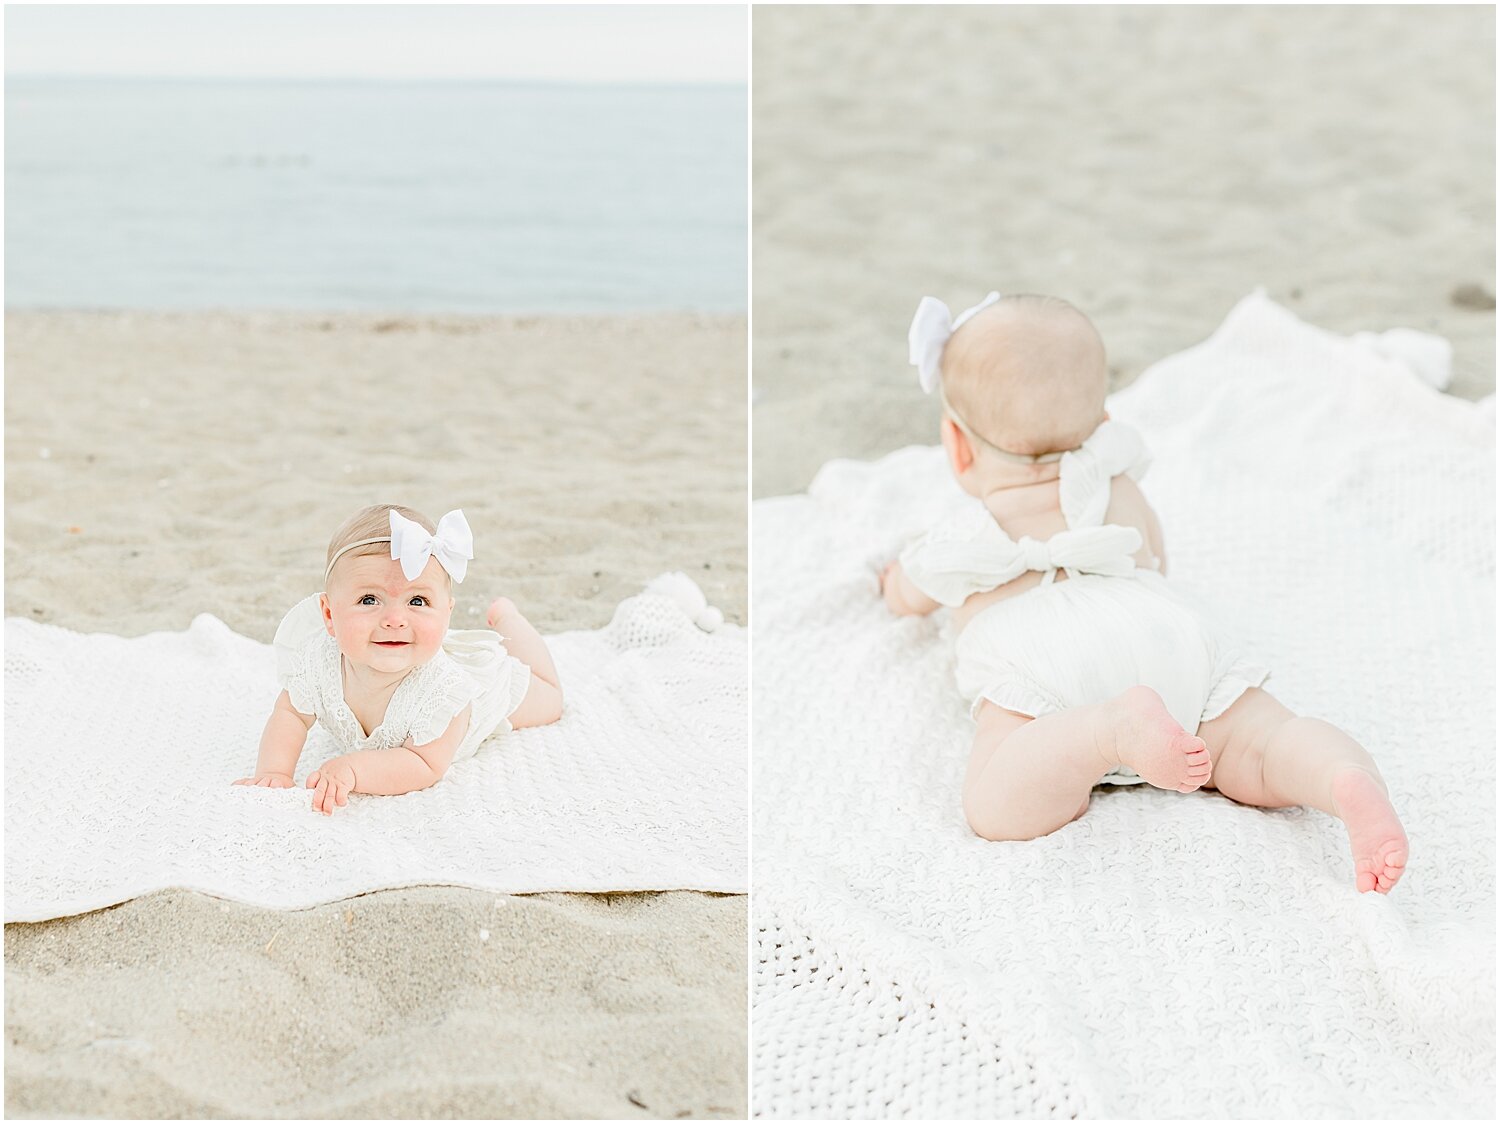 6 month milestone session on the beach with Westport, CT Photographer, Kristin Wood Photography.